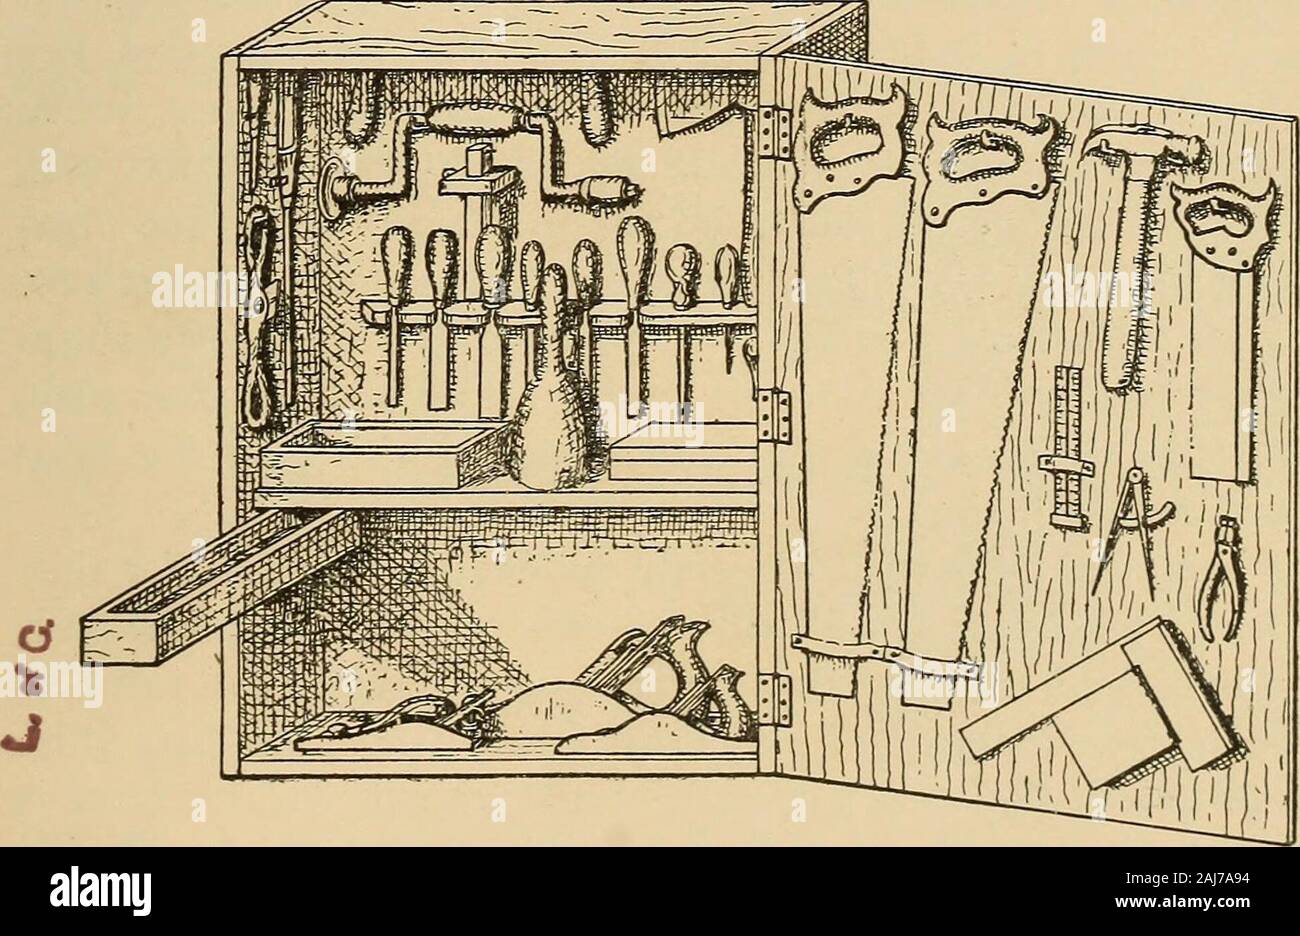 Woodworking for beginners; a manual for amateurs . Fig. 139. of narrow ones, or use the simple device described below (Figs. 141 and 142), and shown in Fig. 139. (See Drmuers in Part V.) To fasten the doors you can hook one on the inside and put a button (which you can whittle out) on the outside to hold tlie loo Wood-Working for Beginners Stock Photo